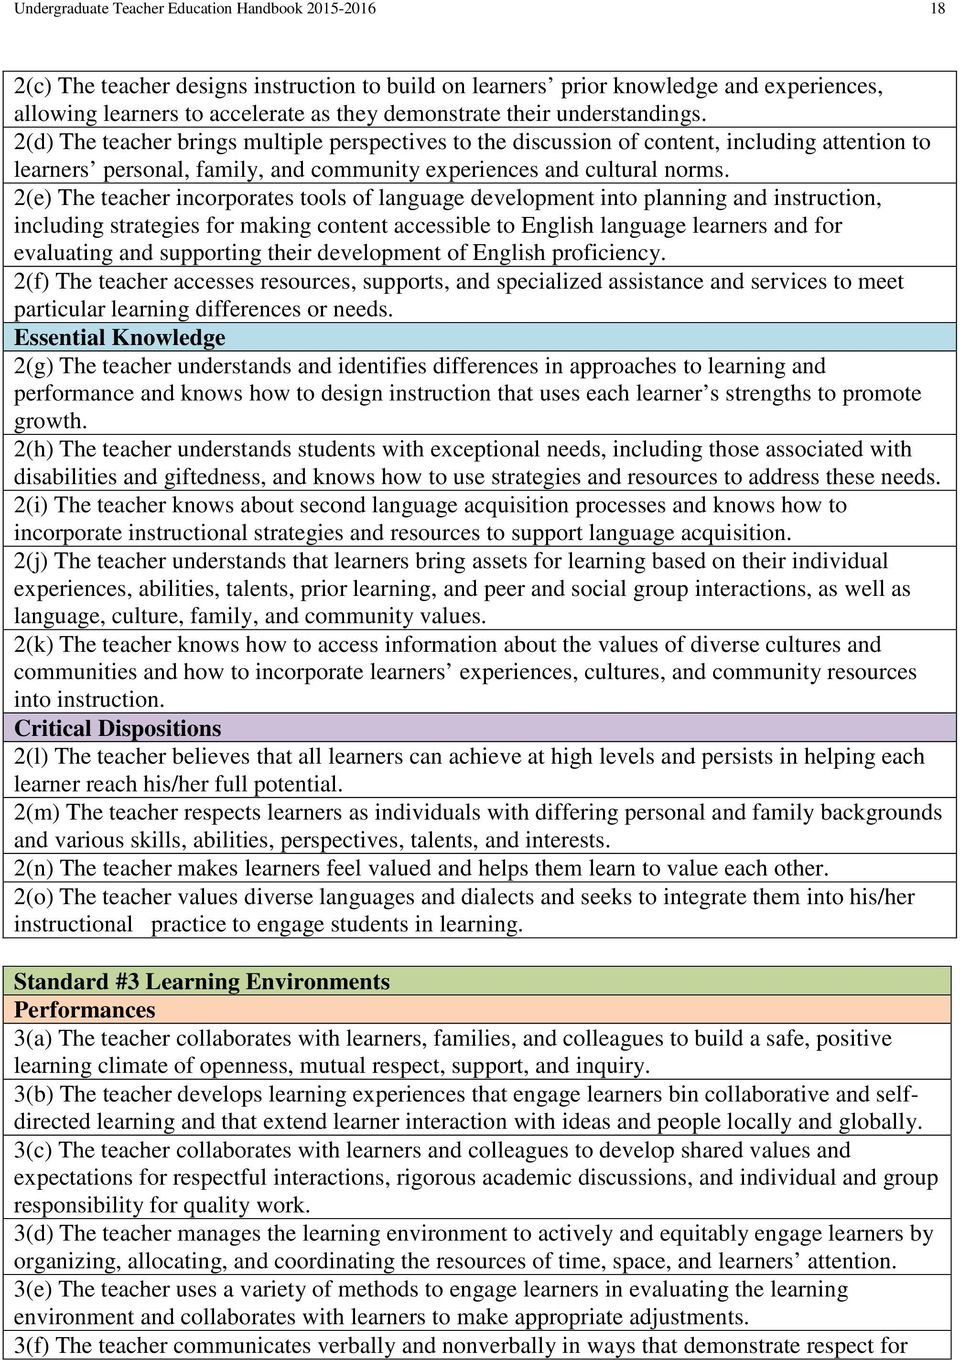 2(e) The teacher incorporates tools of language development into planning and instruction, including strategies for making content accessible to English language learners and for evaluating and